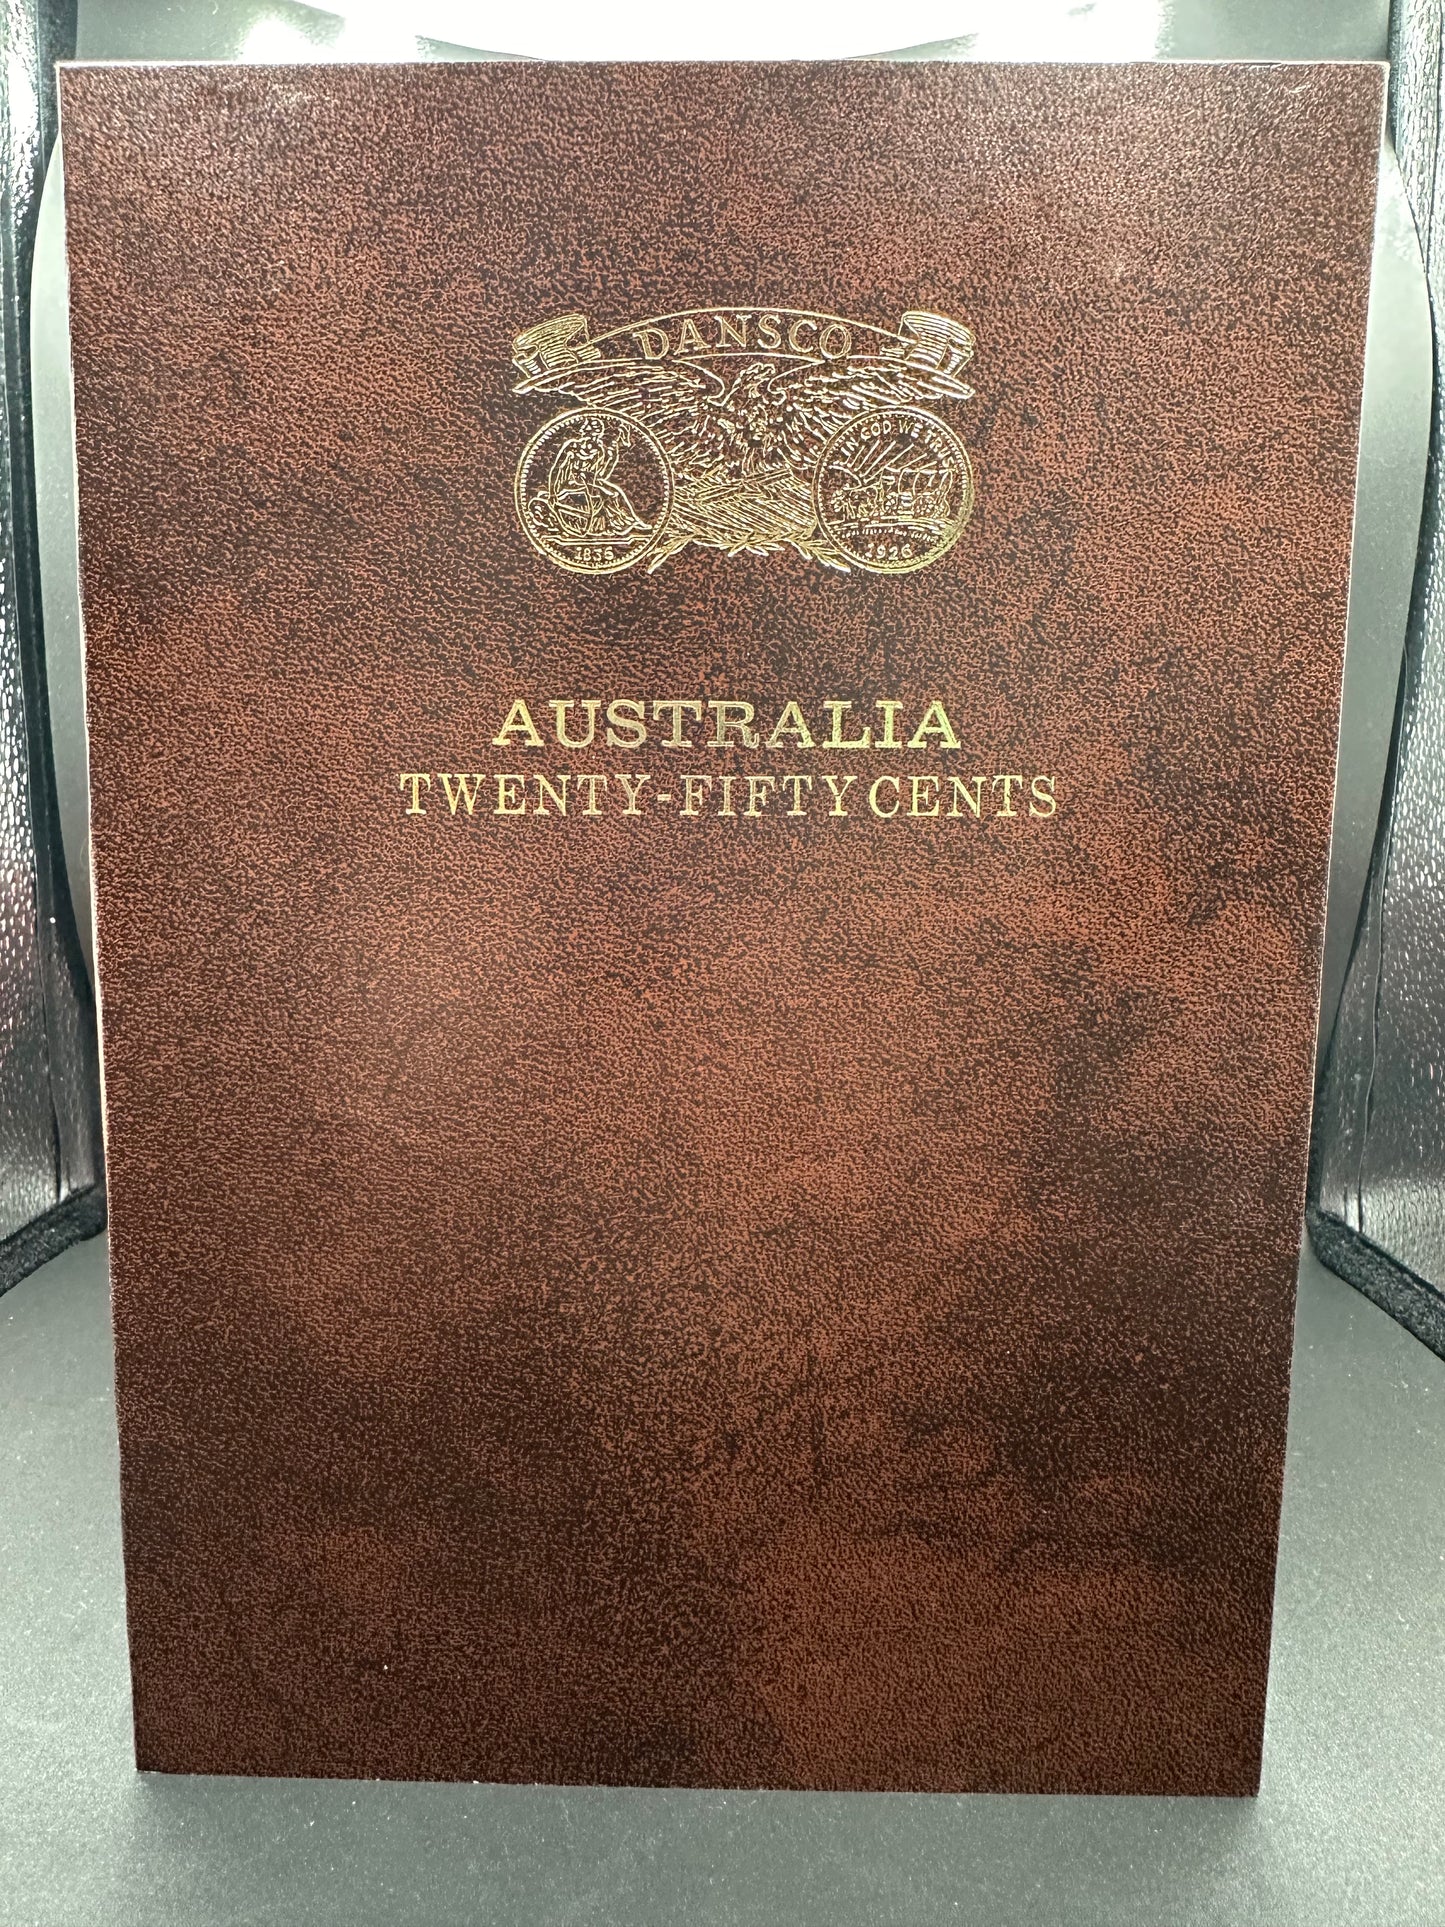 1966 to 1996 Australian 20 and 50 Cent Coin Collection - Uncirculated - Including 1966 round 50 cent